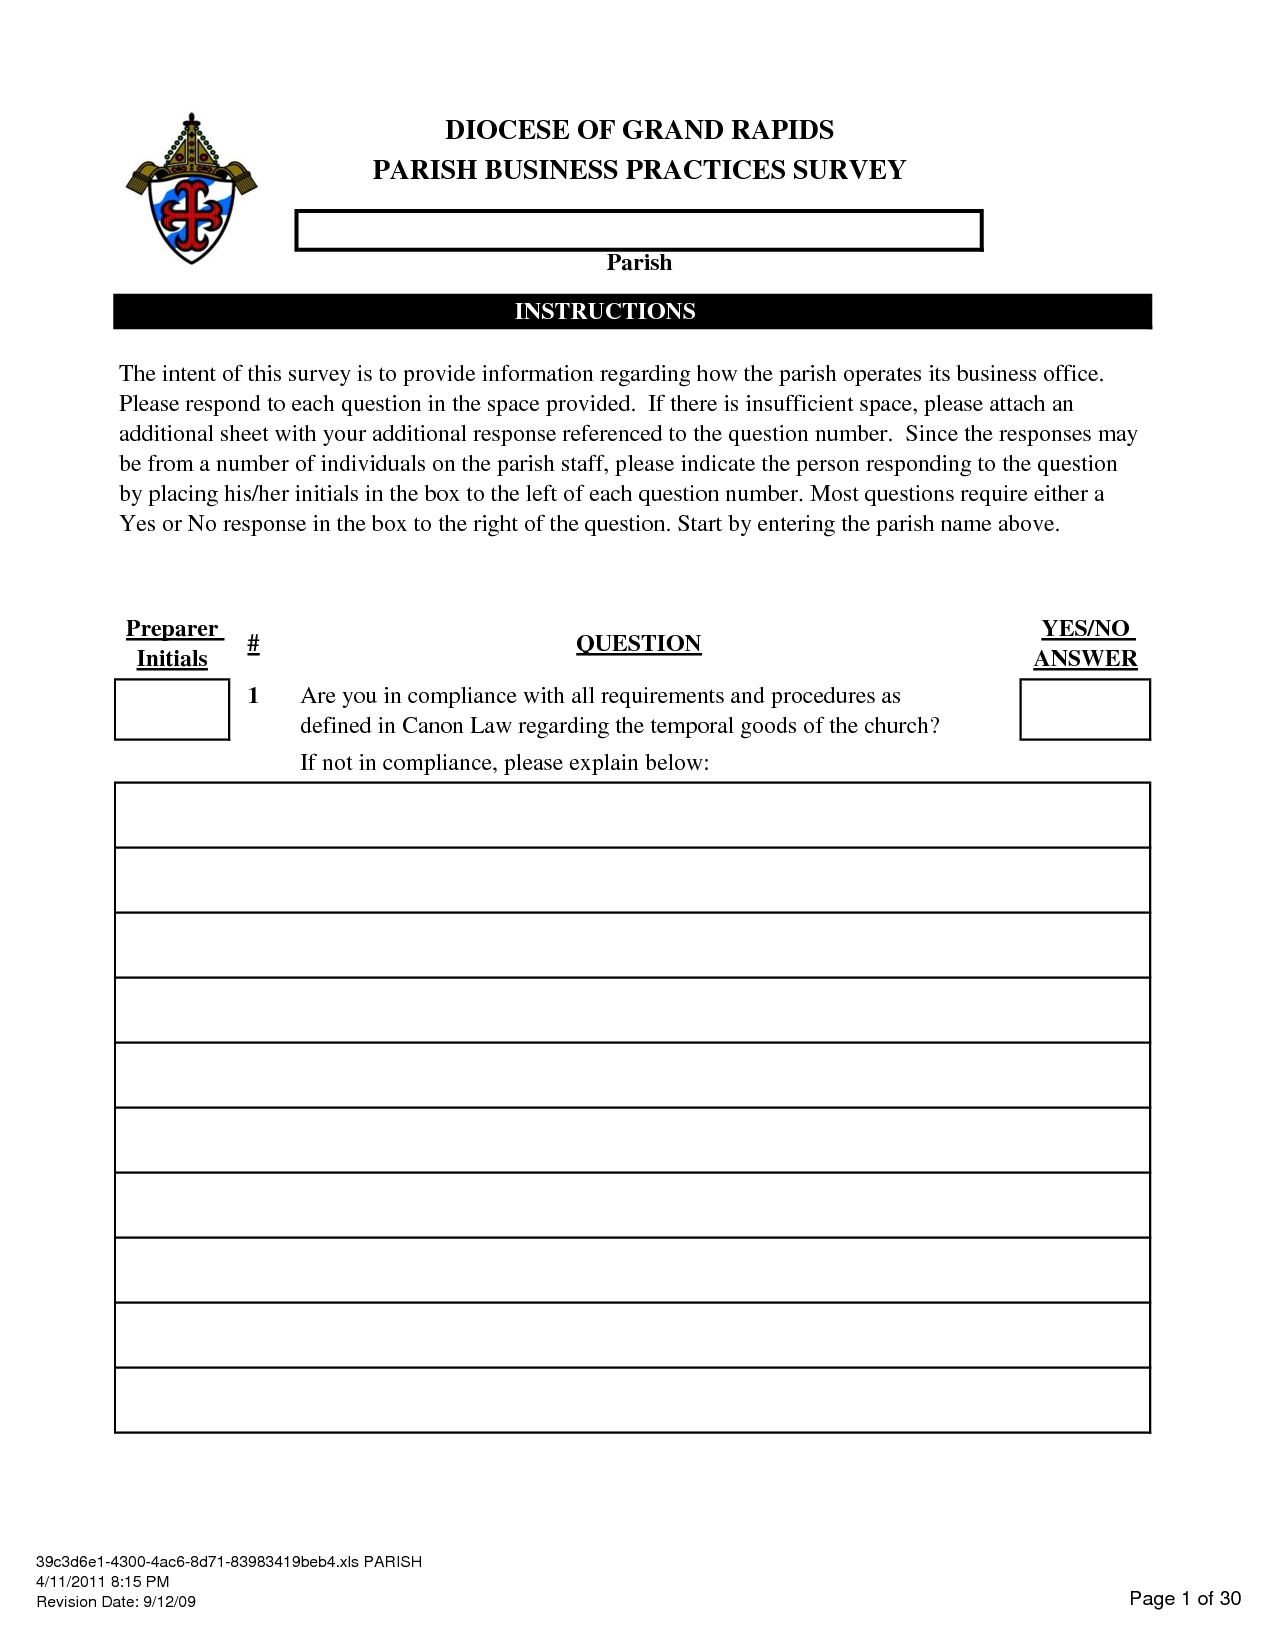 Snow Removal Invoice Template * Invoice Template Ideas